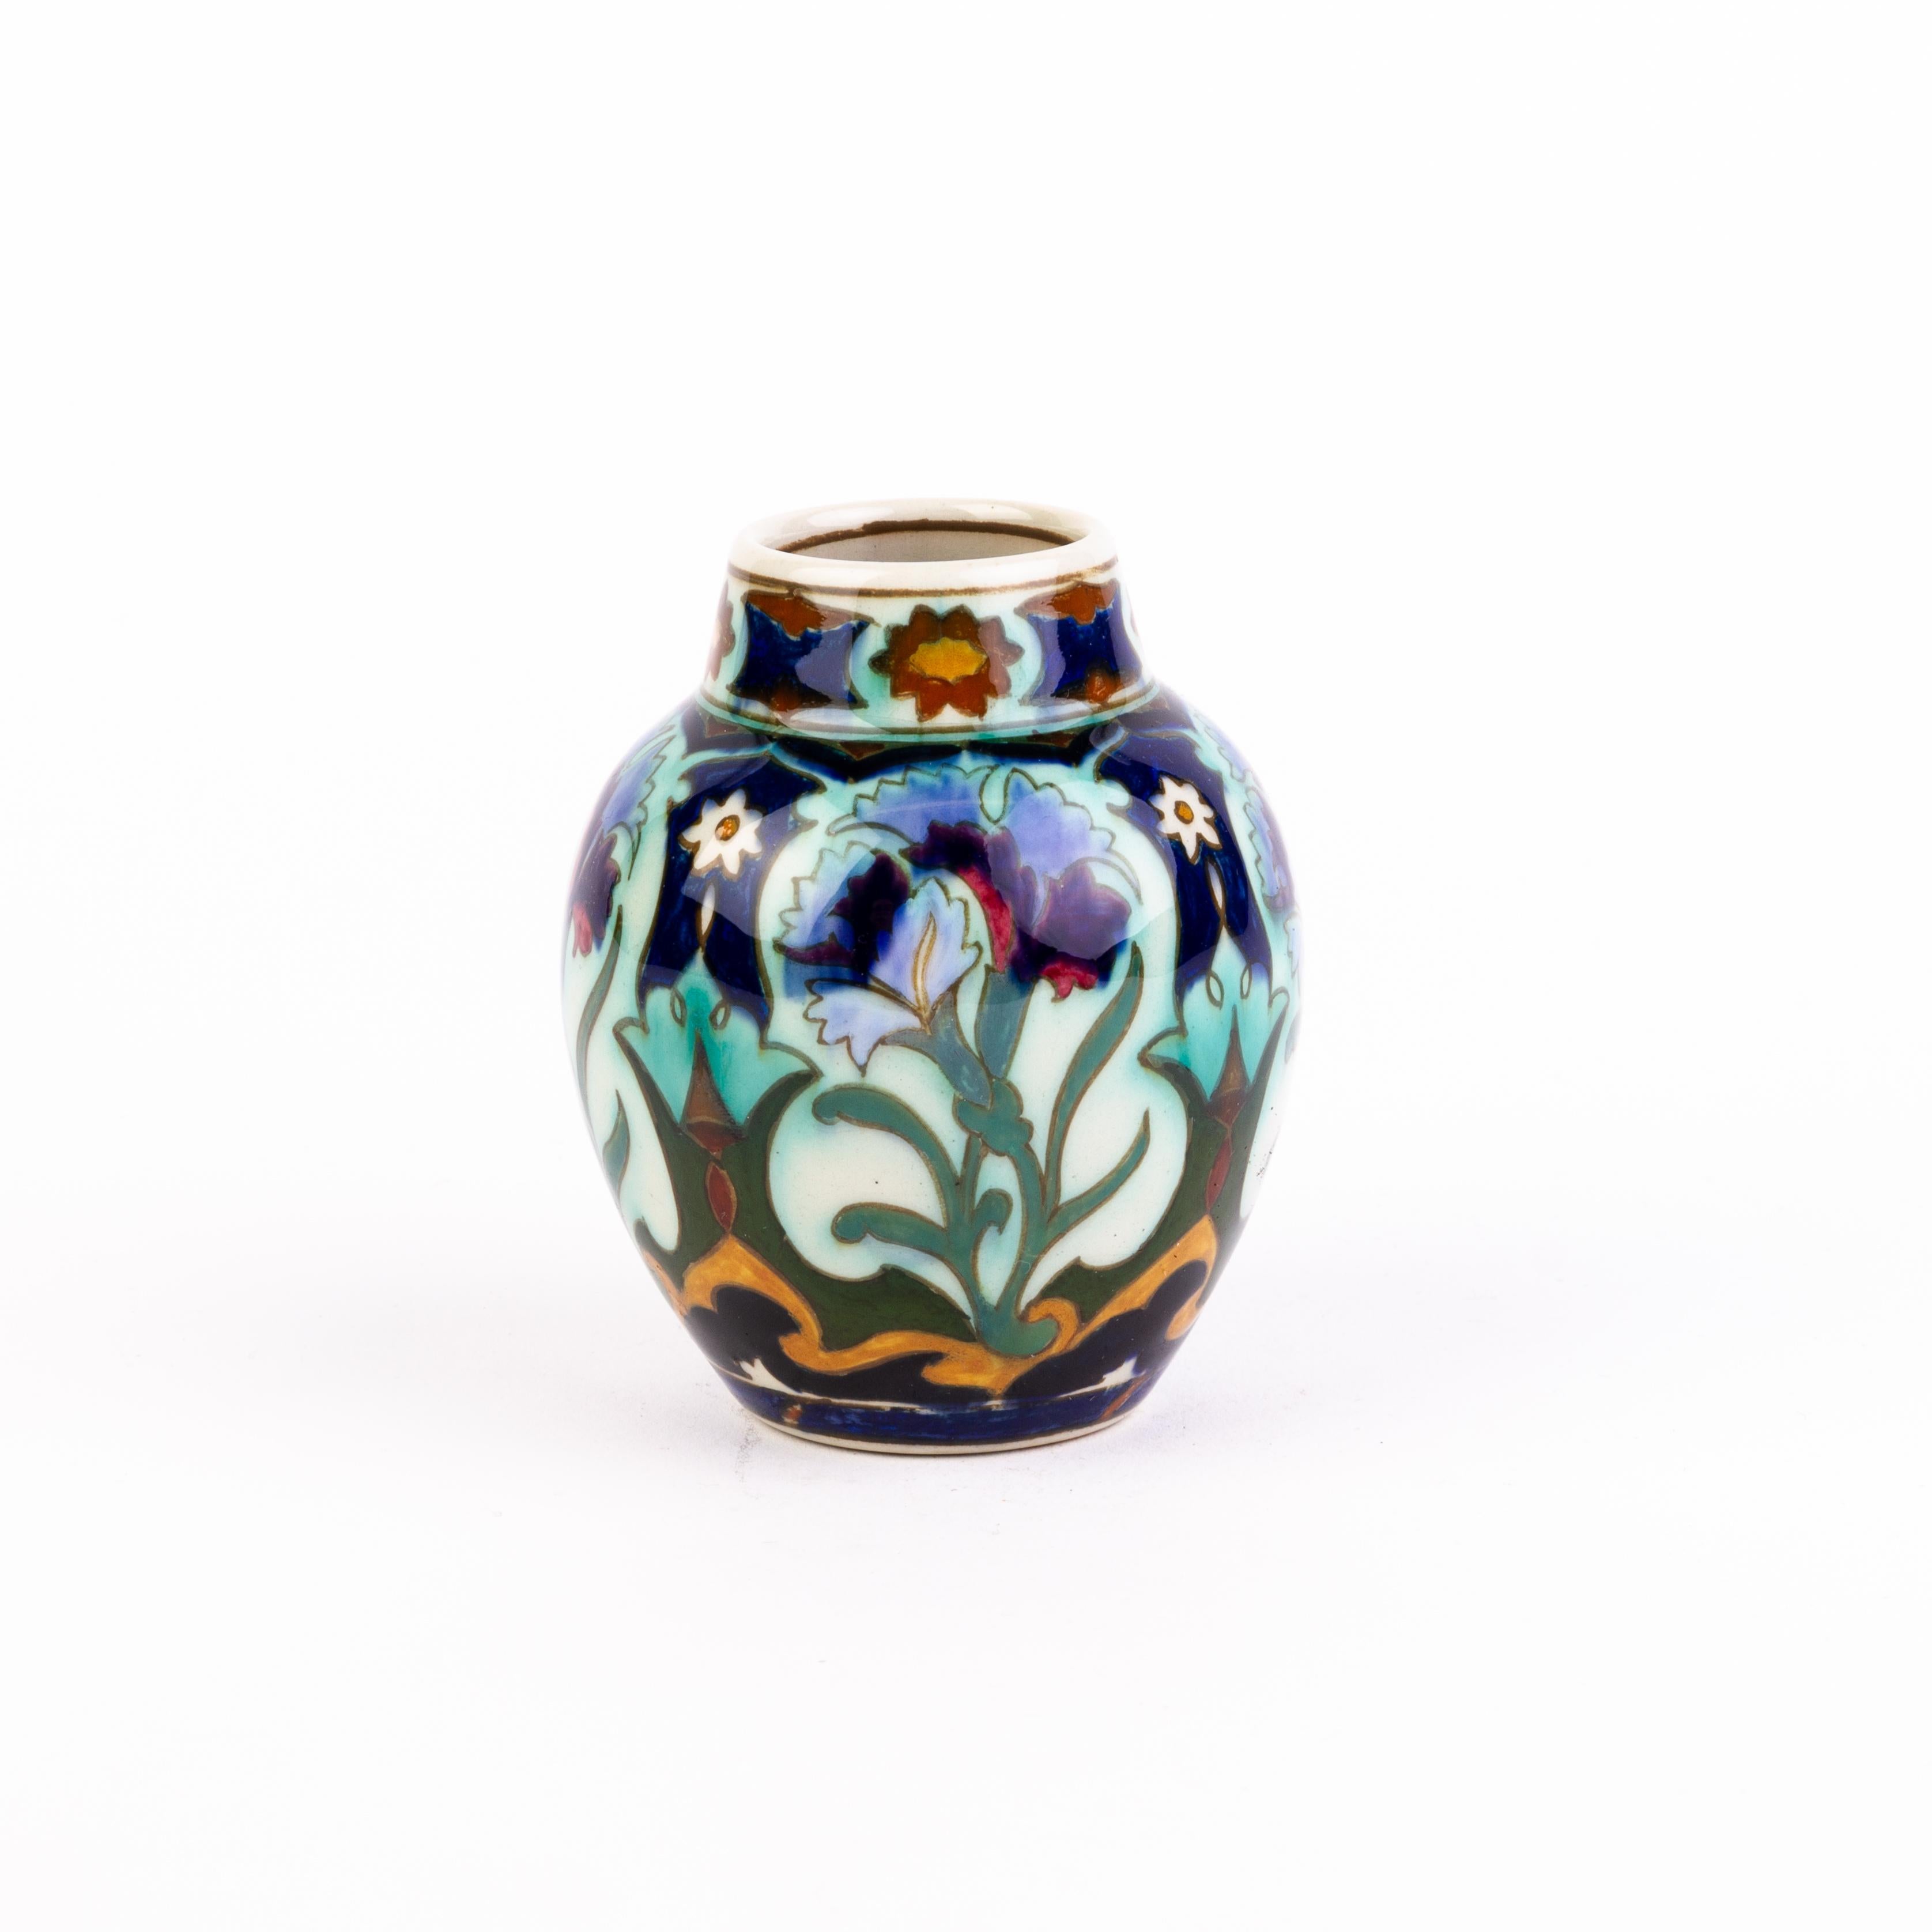 Rozenburg Art Nouveau Pottery Vase
Good condition
From a private collection.
Free international shipping.